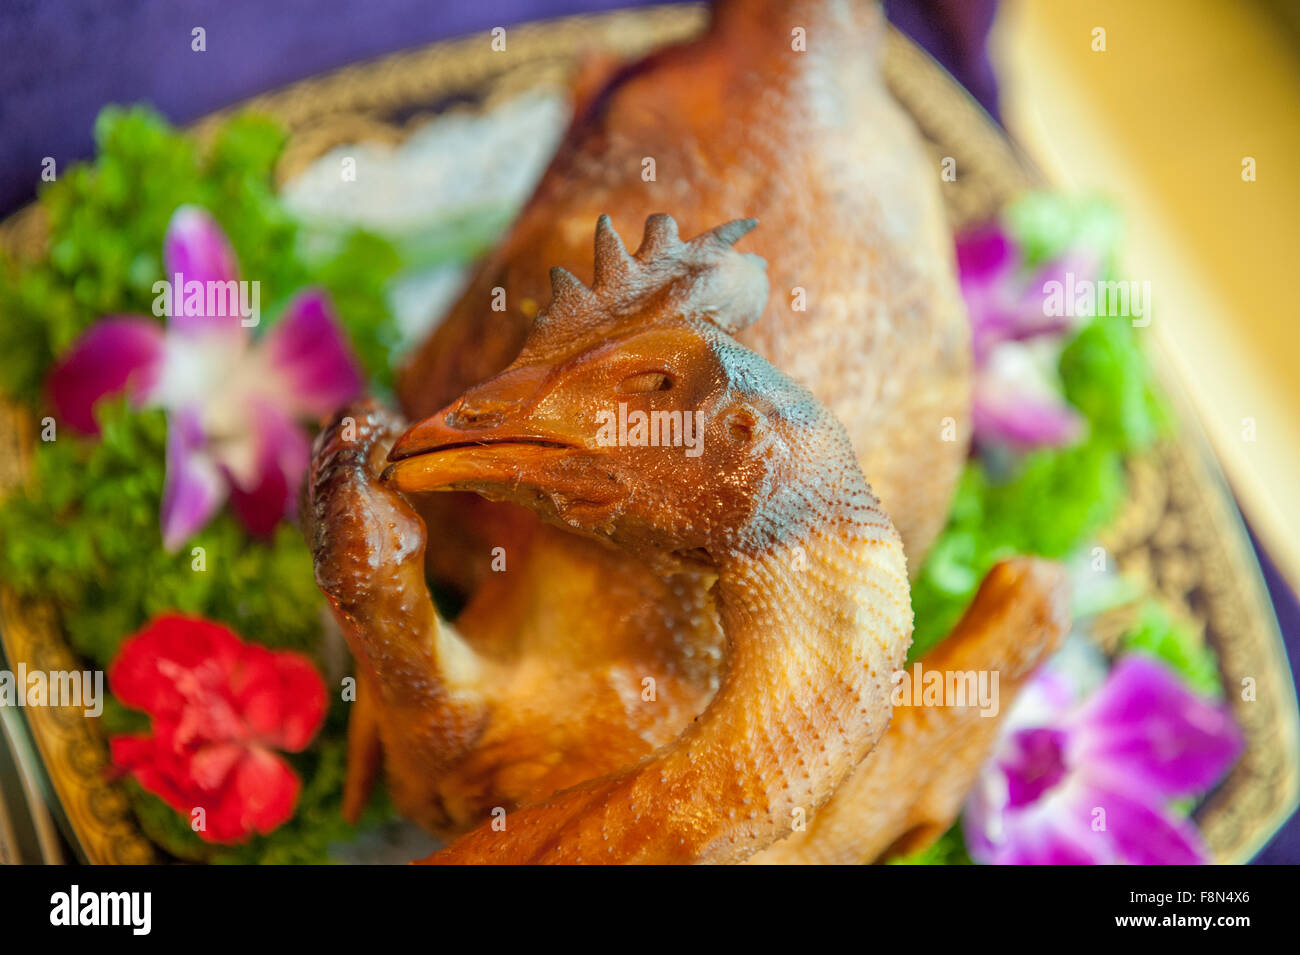 Whole chicken on a dish to be served at restaurant Stock Photo